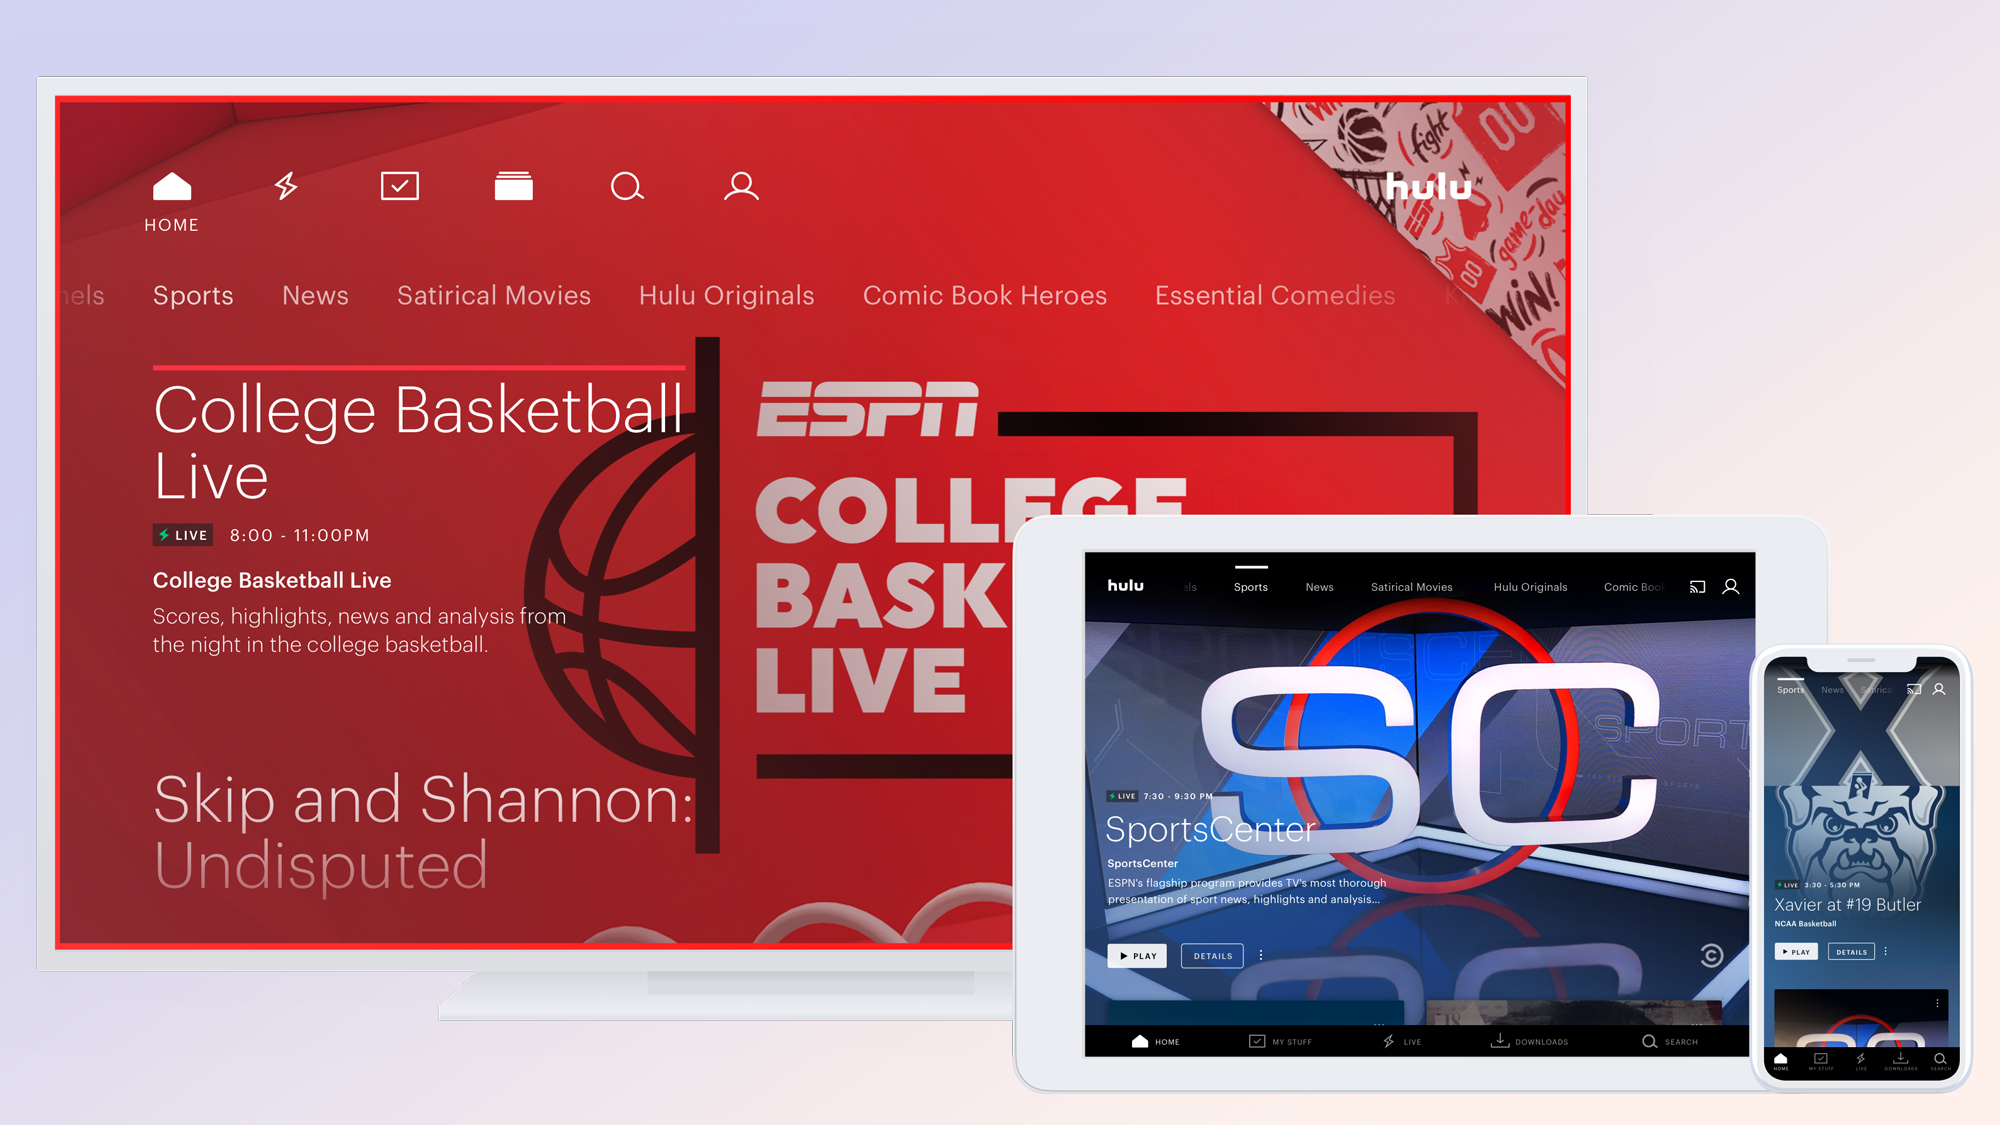 ESPN content on Hulu with Live TV on a TV, tablet and phone